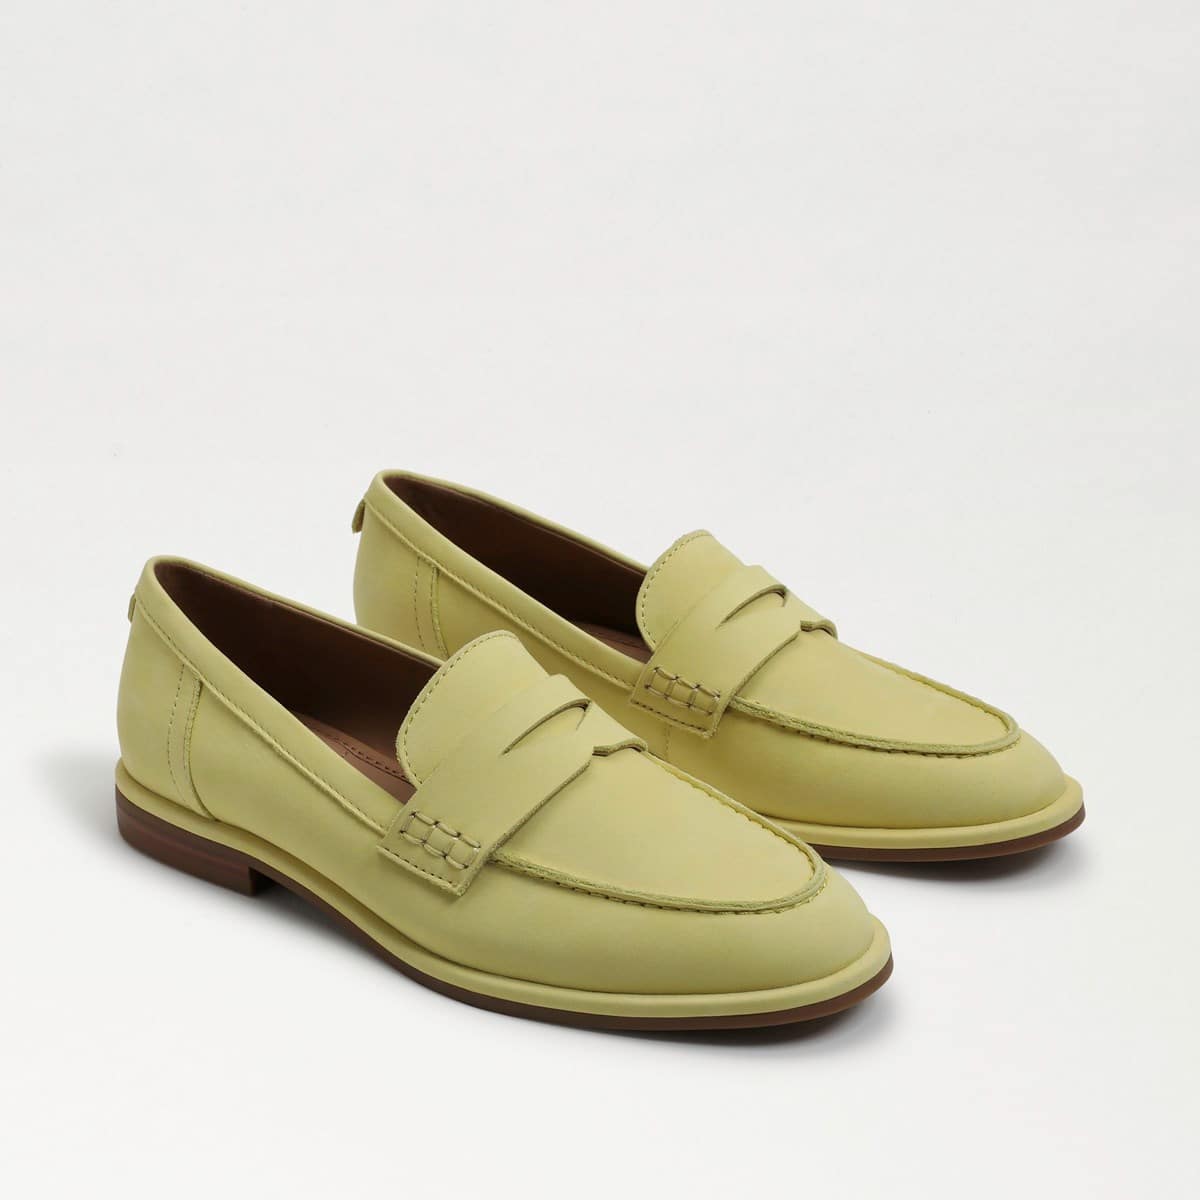 Sam Edelman Birch Penny Loafer Butter Yellow Leather kqxRCreG